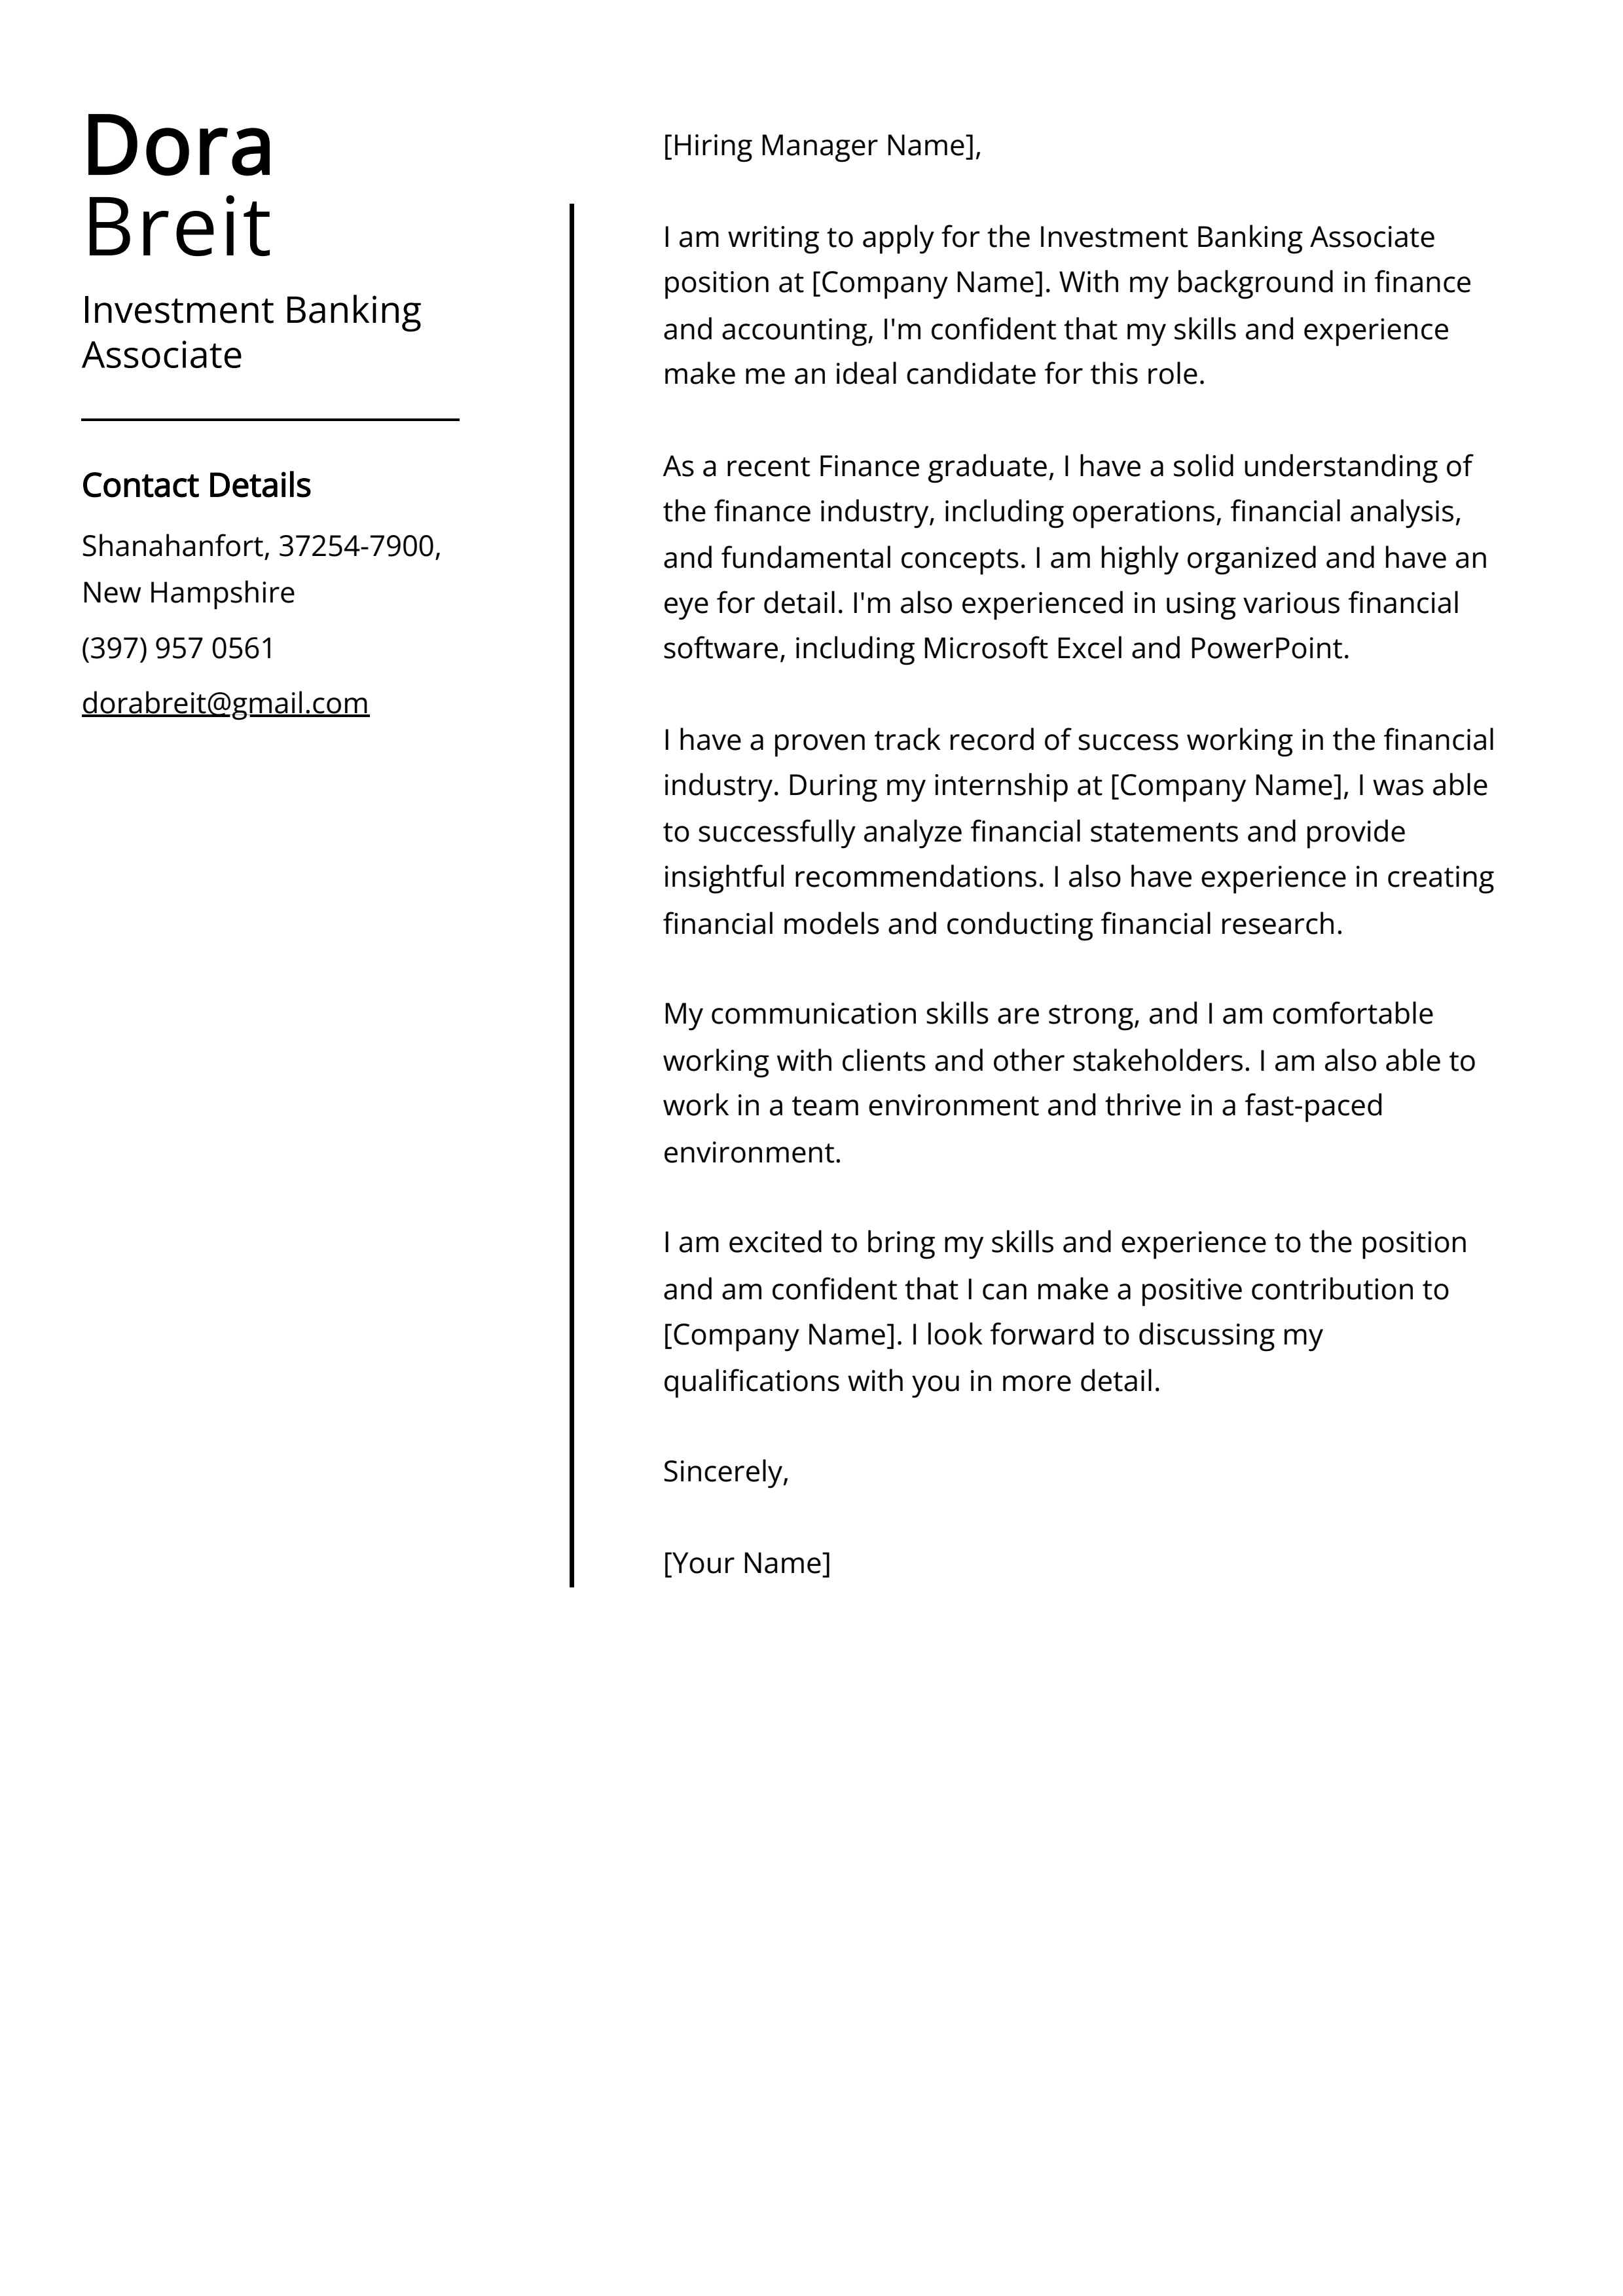 Investment Banking Associate Cover Letter Example